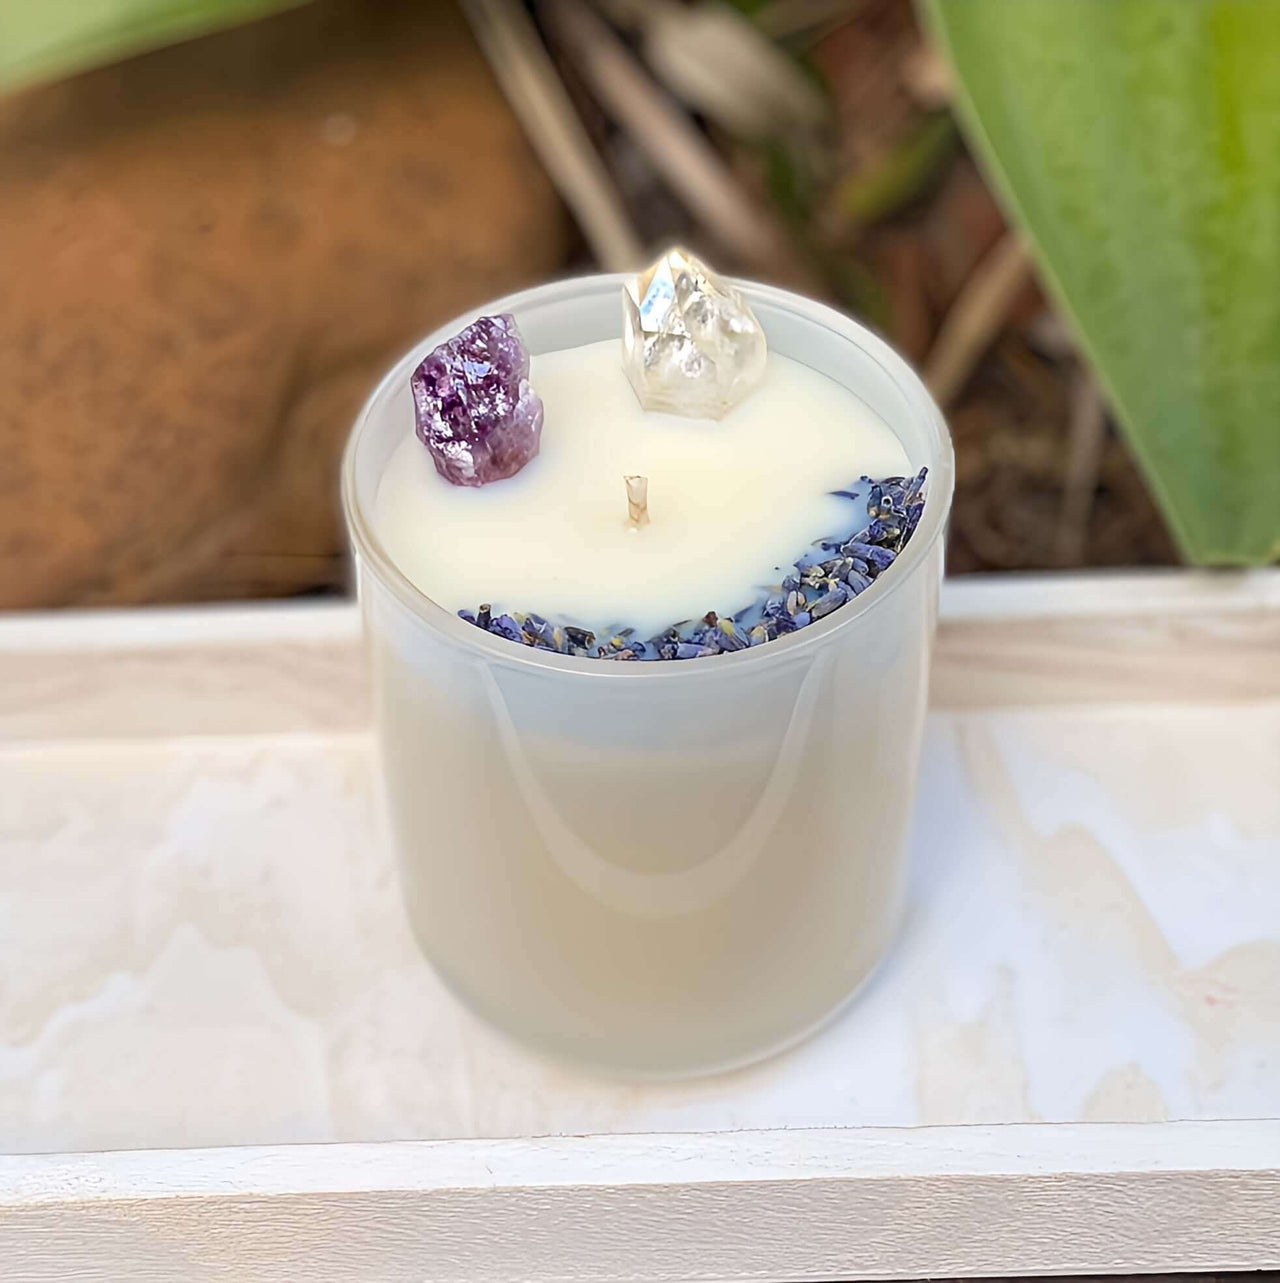 Amethyst Infused Candle - Serene Aroma Indulge in tranquility with our Amethyst Crystal Candle. Handcrafted with natural soy wax for a peaceful and healing aromatherapy experience.